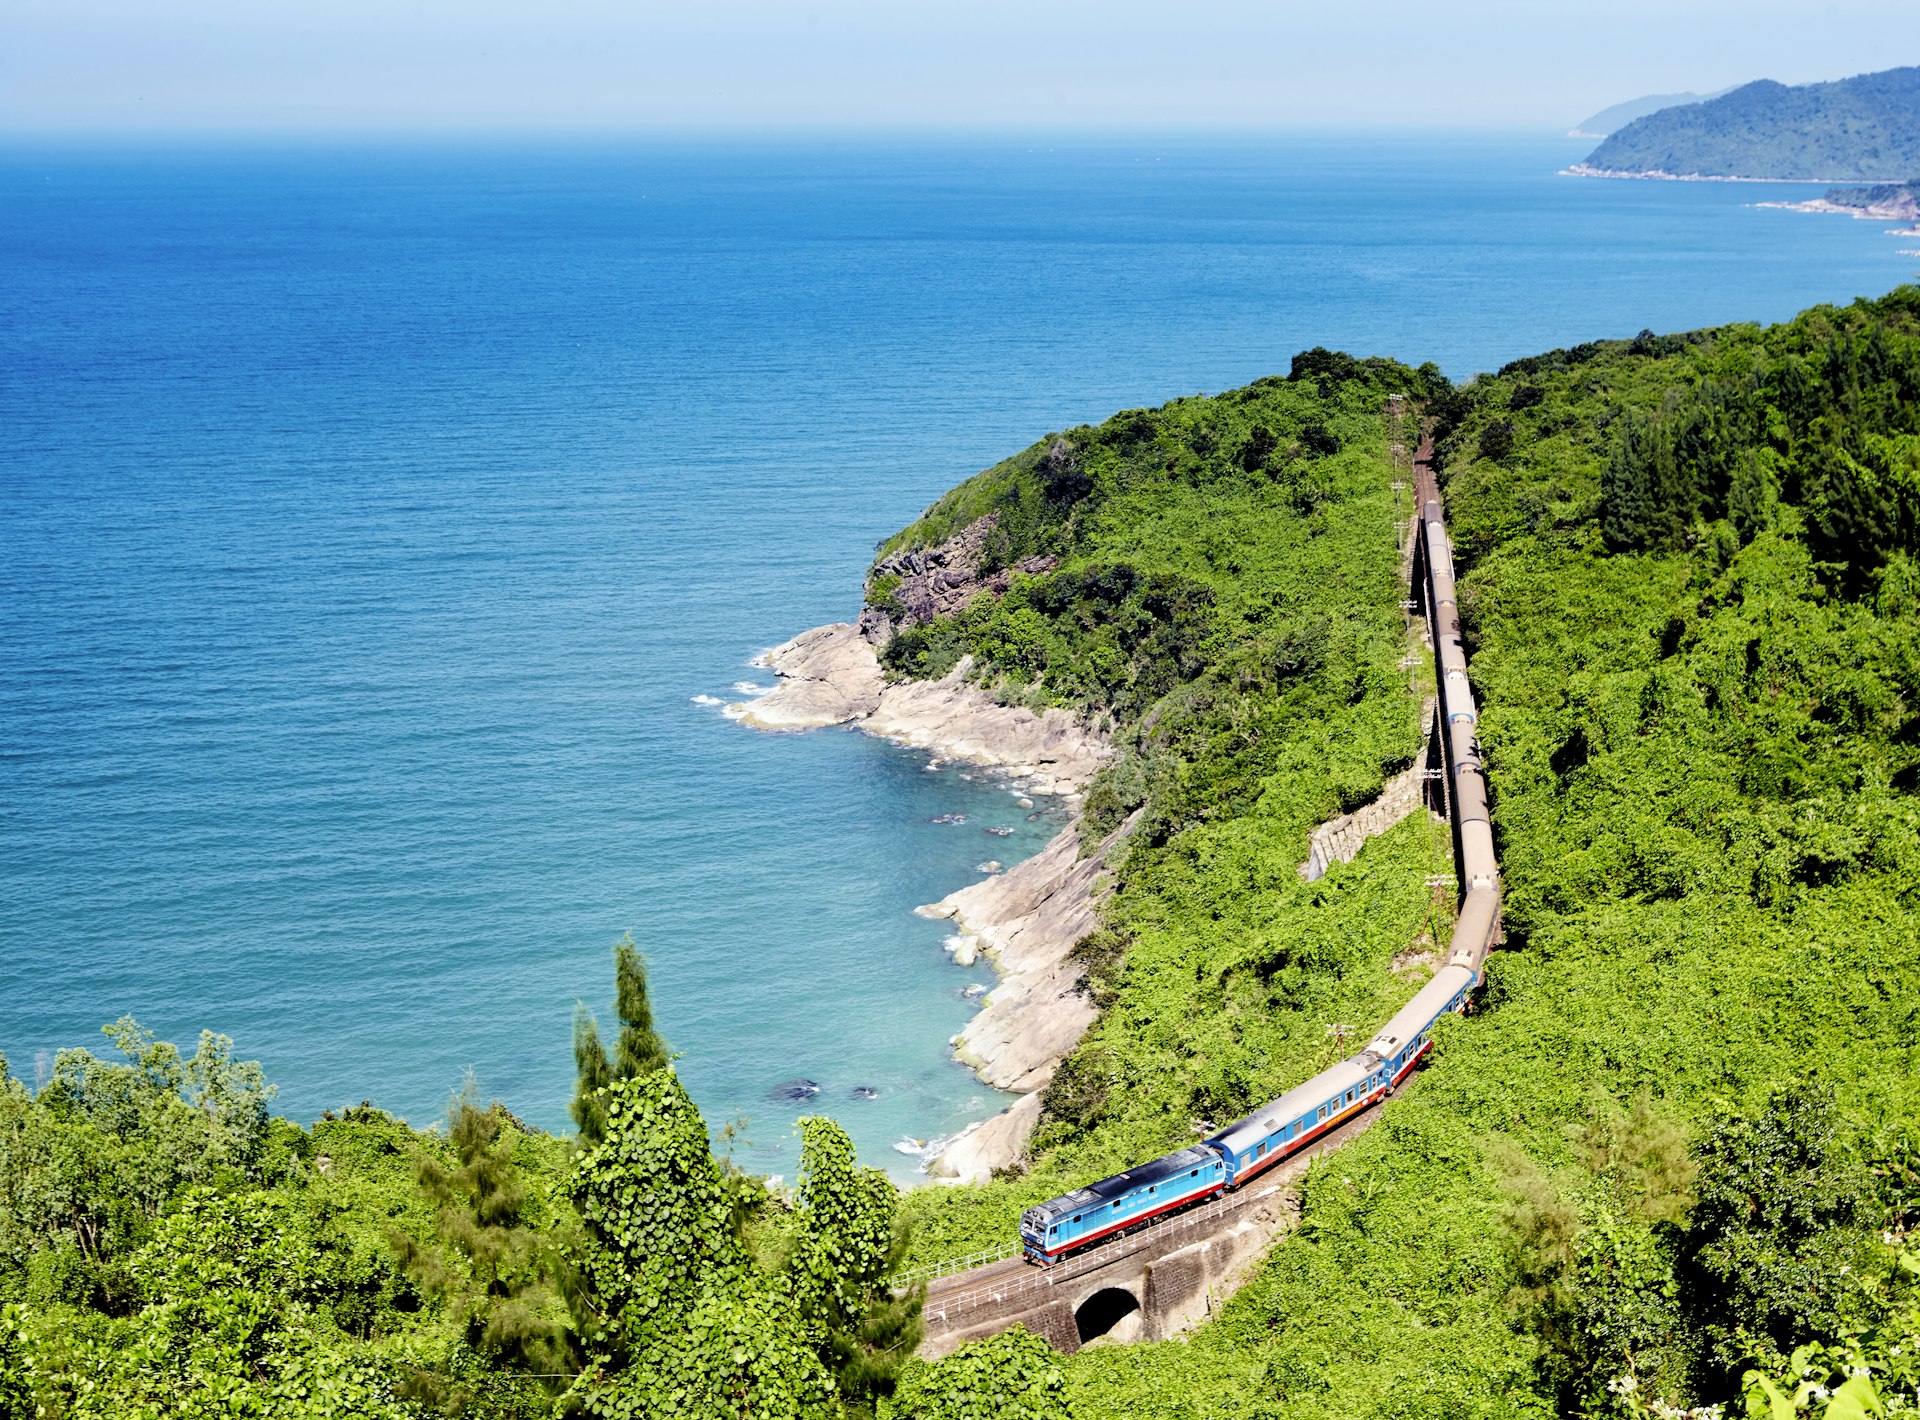 A train runs along a train track alongside the sea in Vietnam. On the other side of the tracks is thick forest.